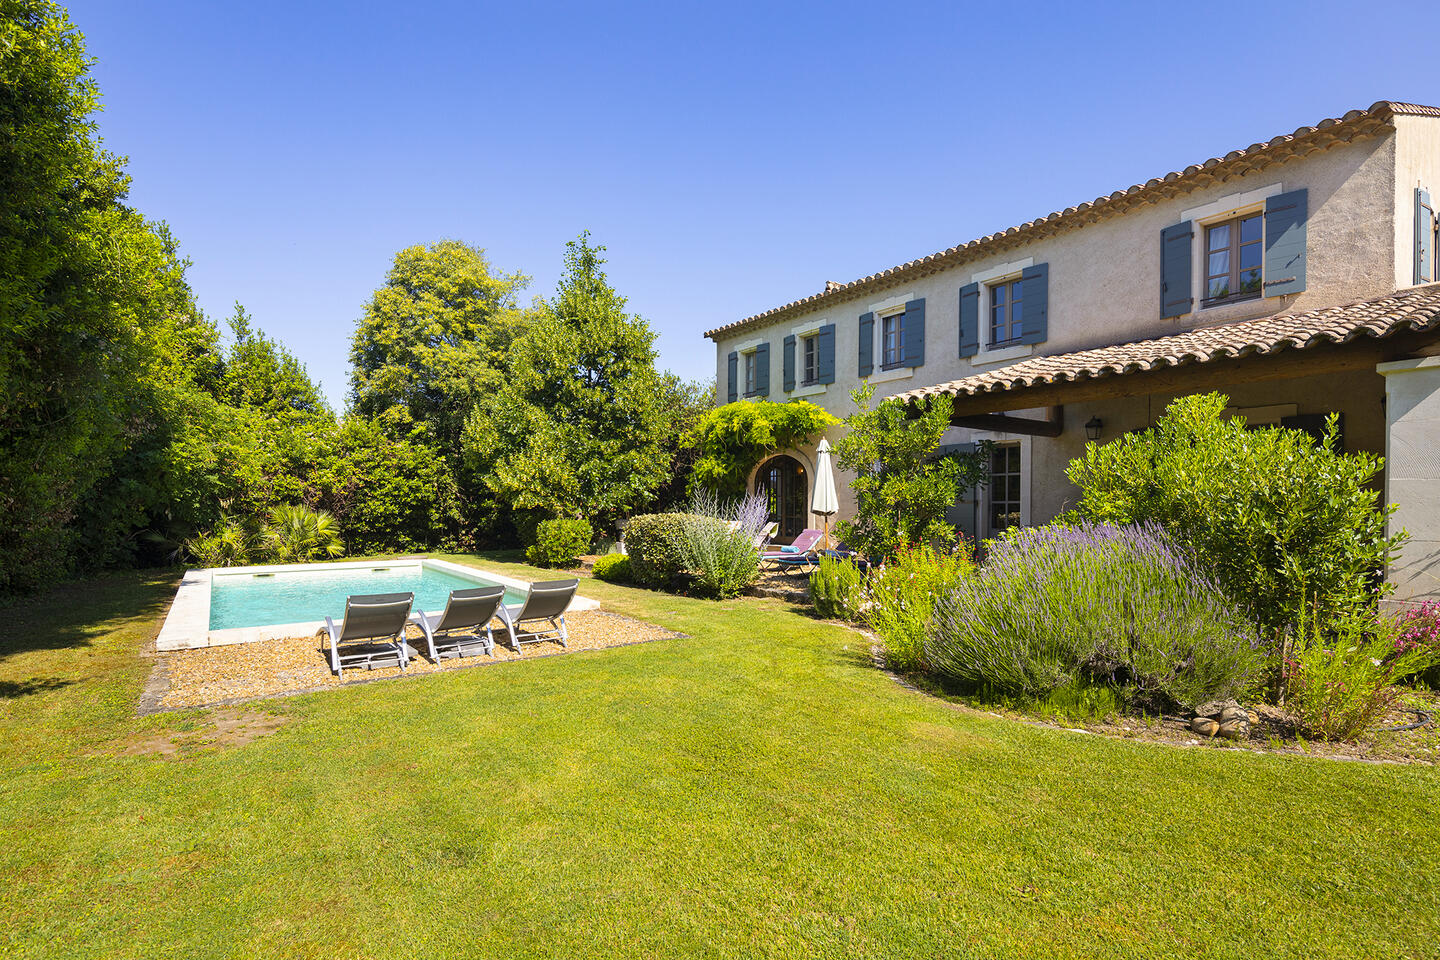 25 - Air-conditioned Bastide with swimming pool near the centre of Saint-Rémy: Villa: Exterior